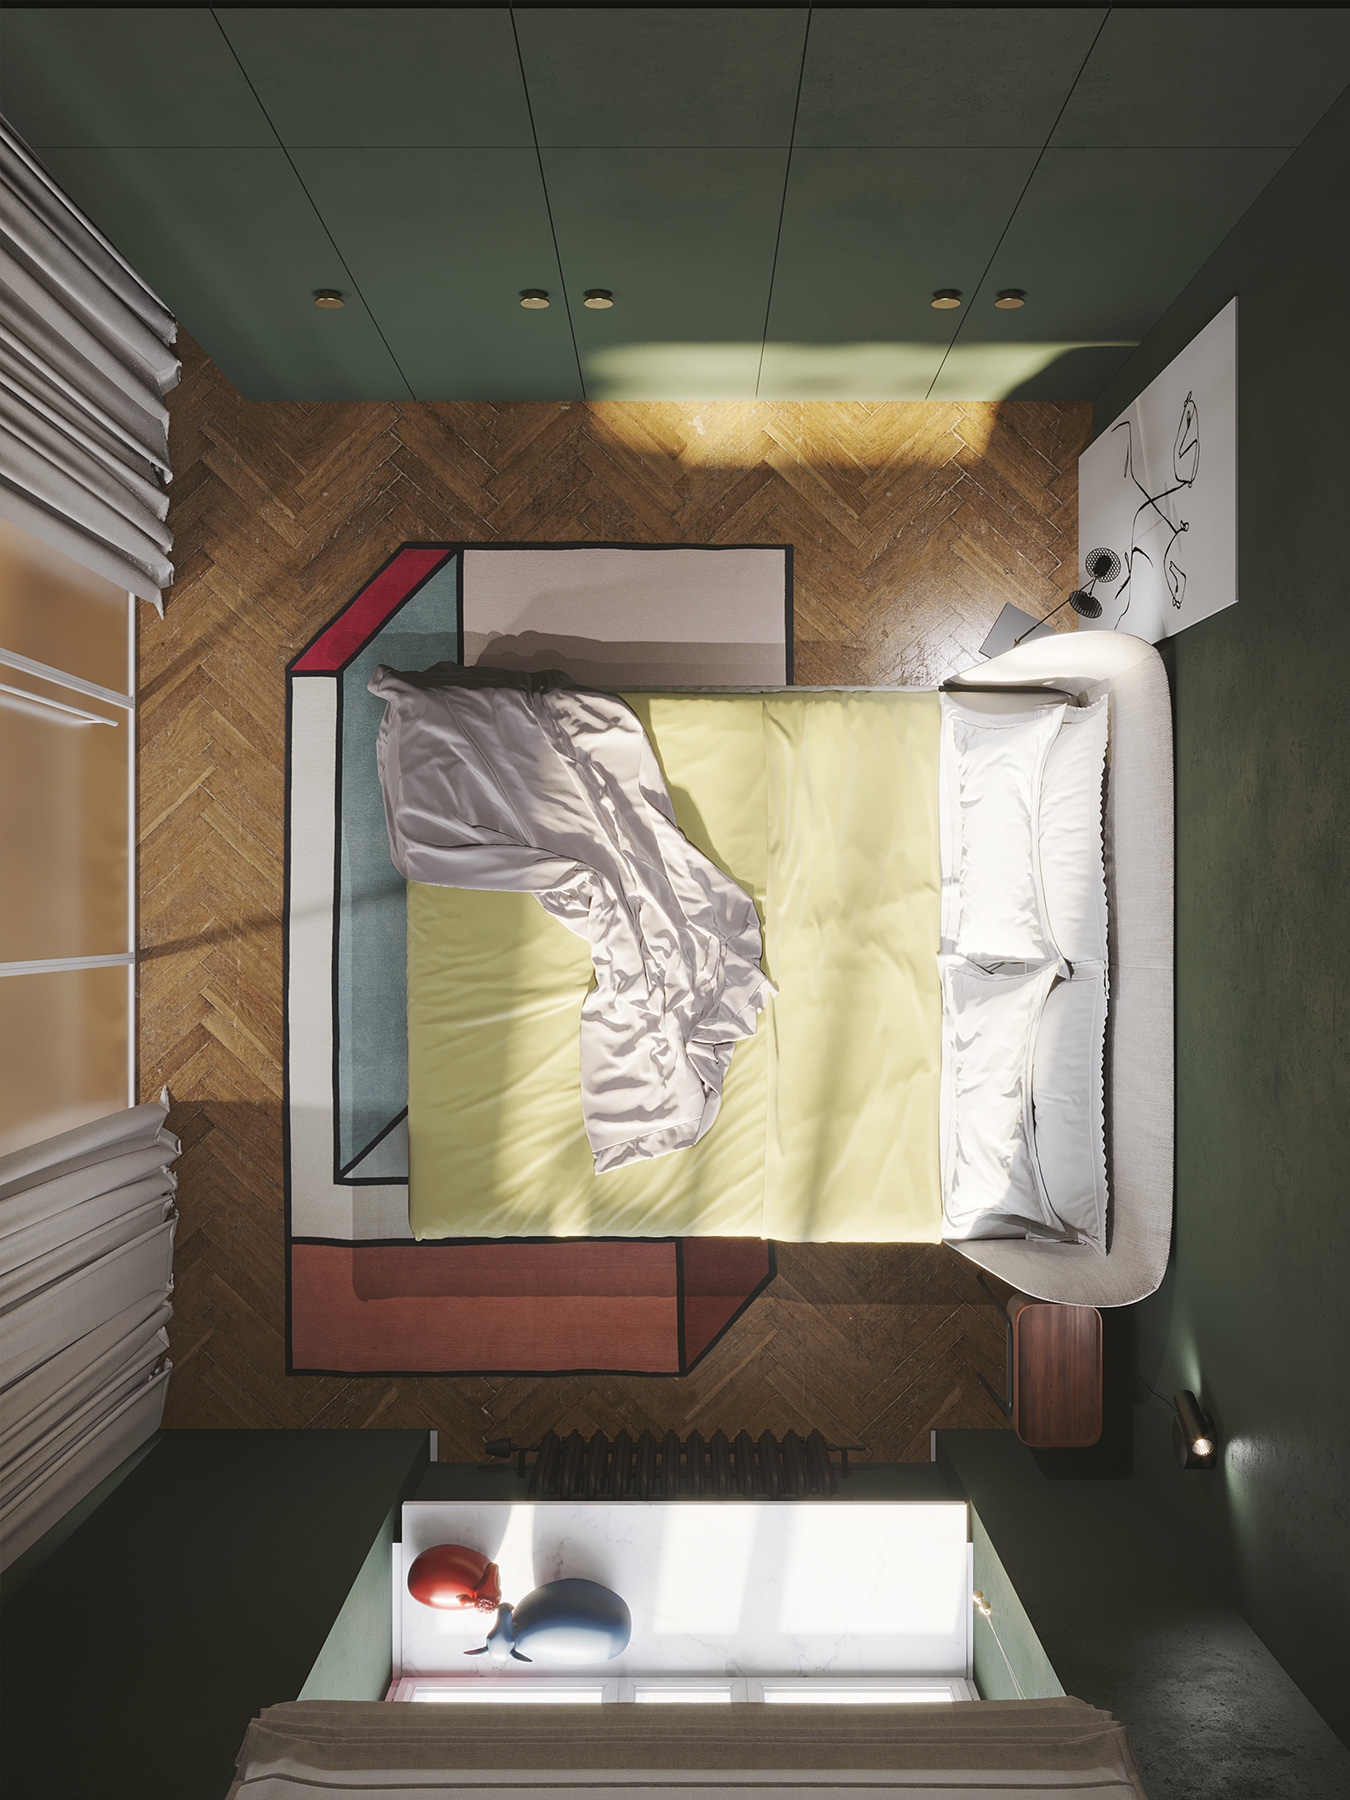 Bedroom from above